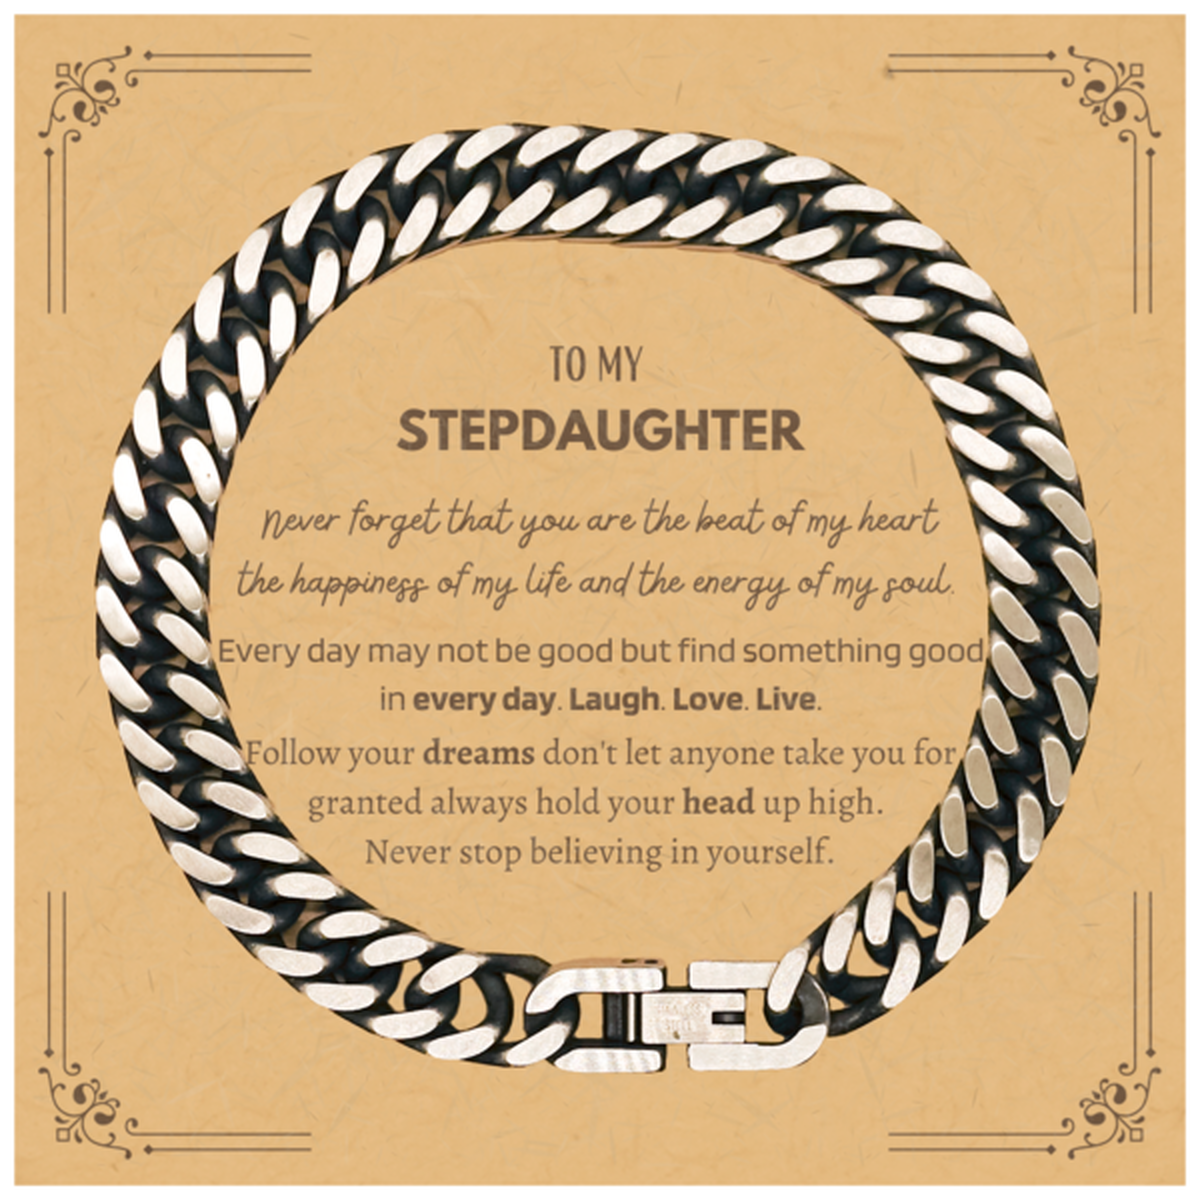 To My Stepdaughter Message Card Gifts, Christmas Stepdaughter Cuban Link Chain Bracelet Present, Birthday Unique Motivational For Stepdaughter, To My Stepdaughter Never forget that you are the beat of my heart the happiness of my life and the energy of my